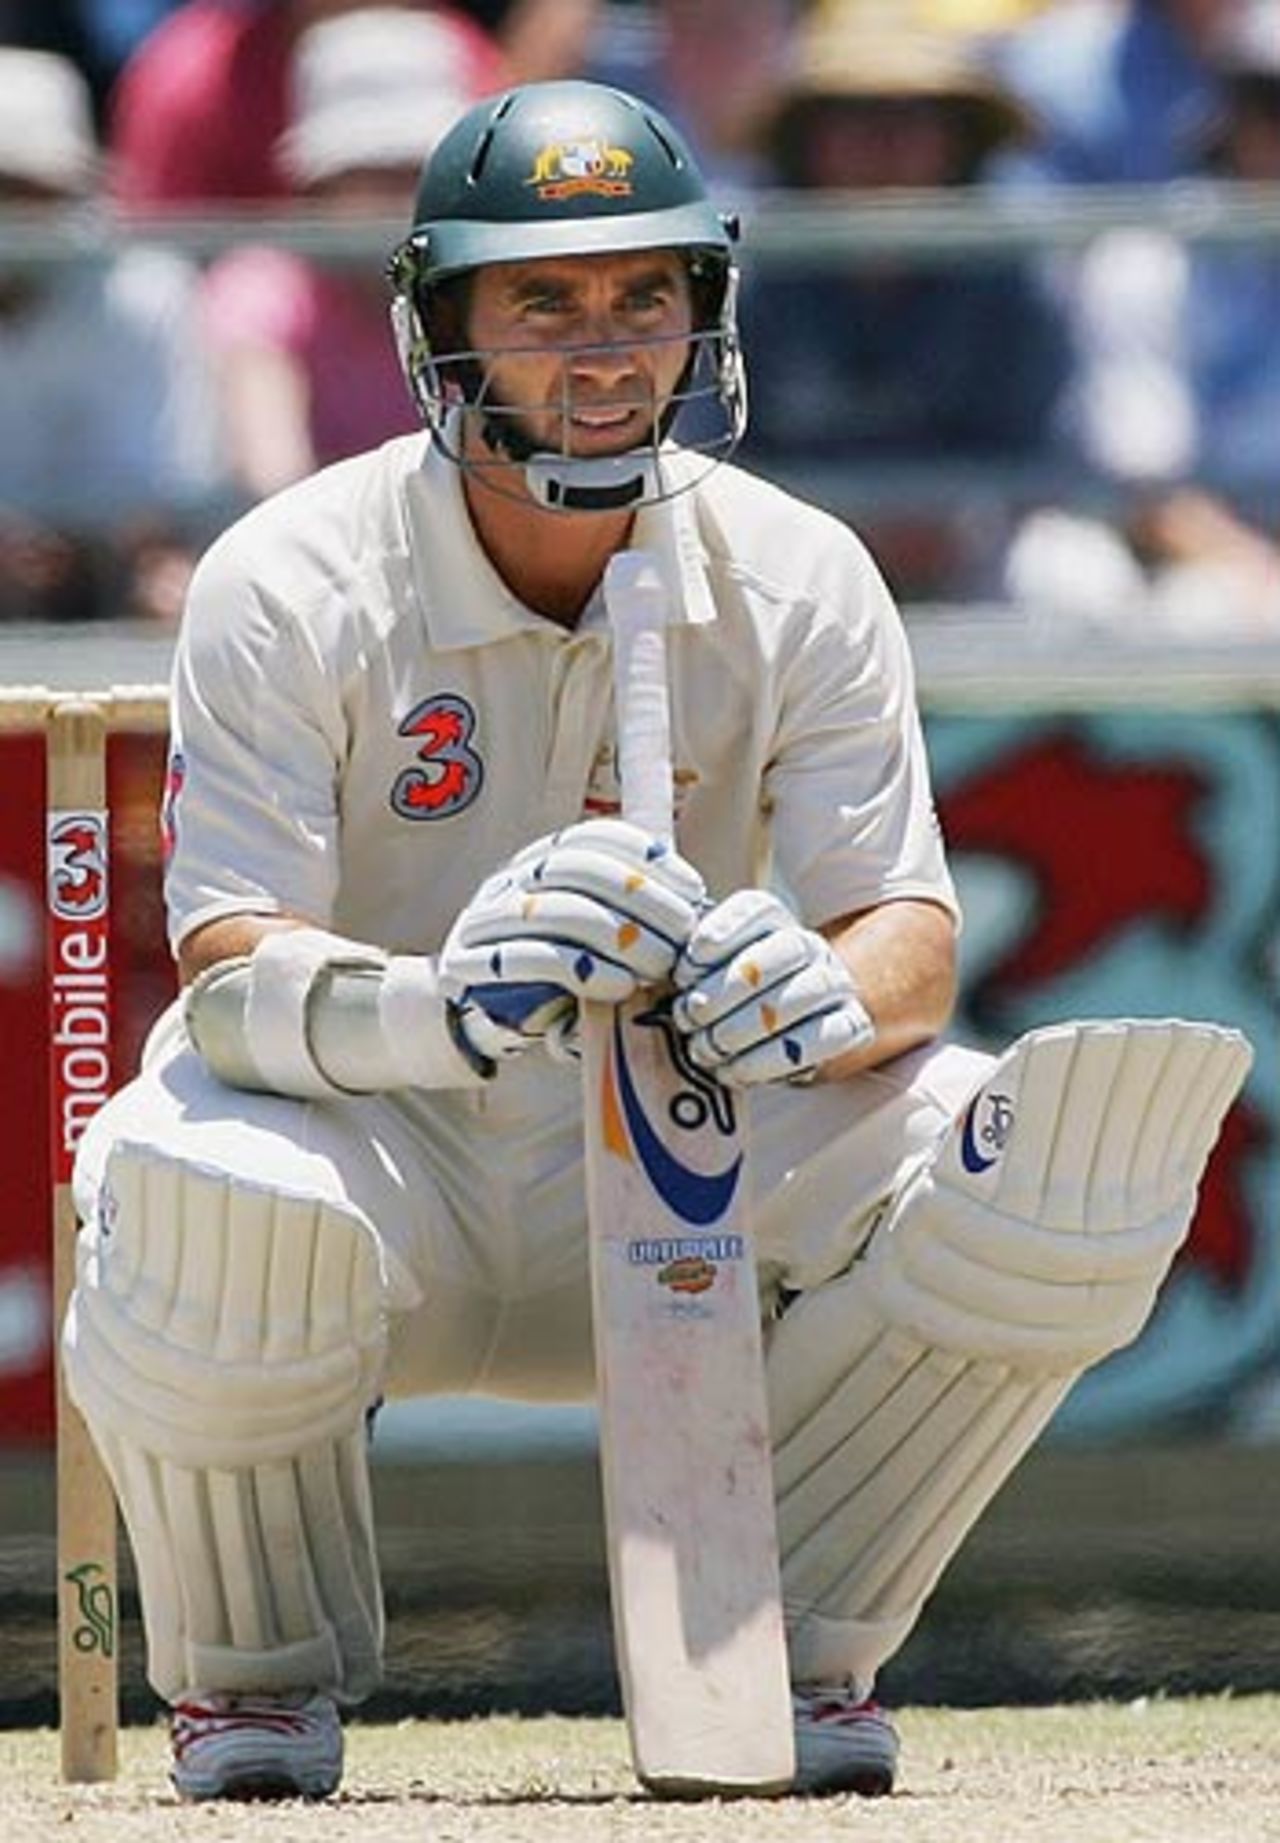 Justin Langer takes a breather, Australia v South Africa, 1st Test, Perth, 3rd day, December 18, 2005